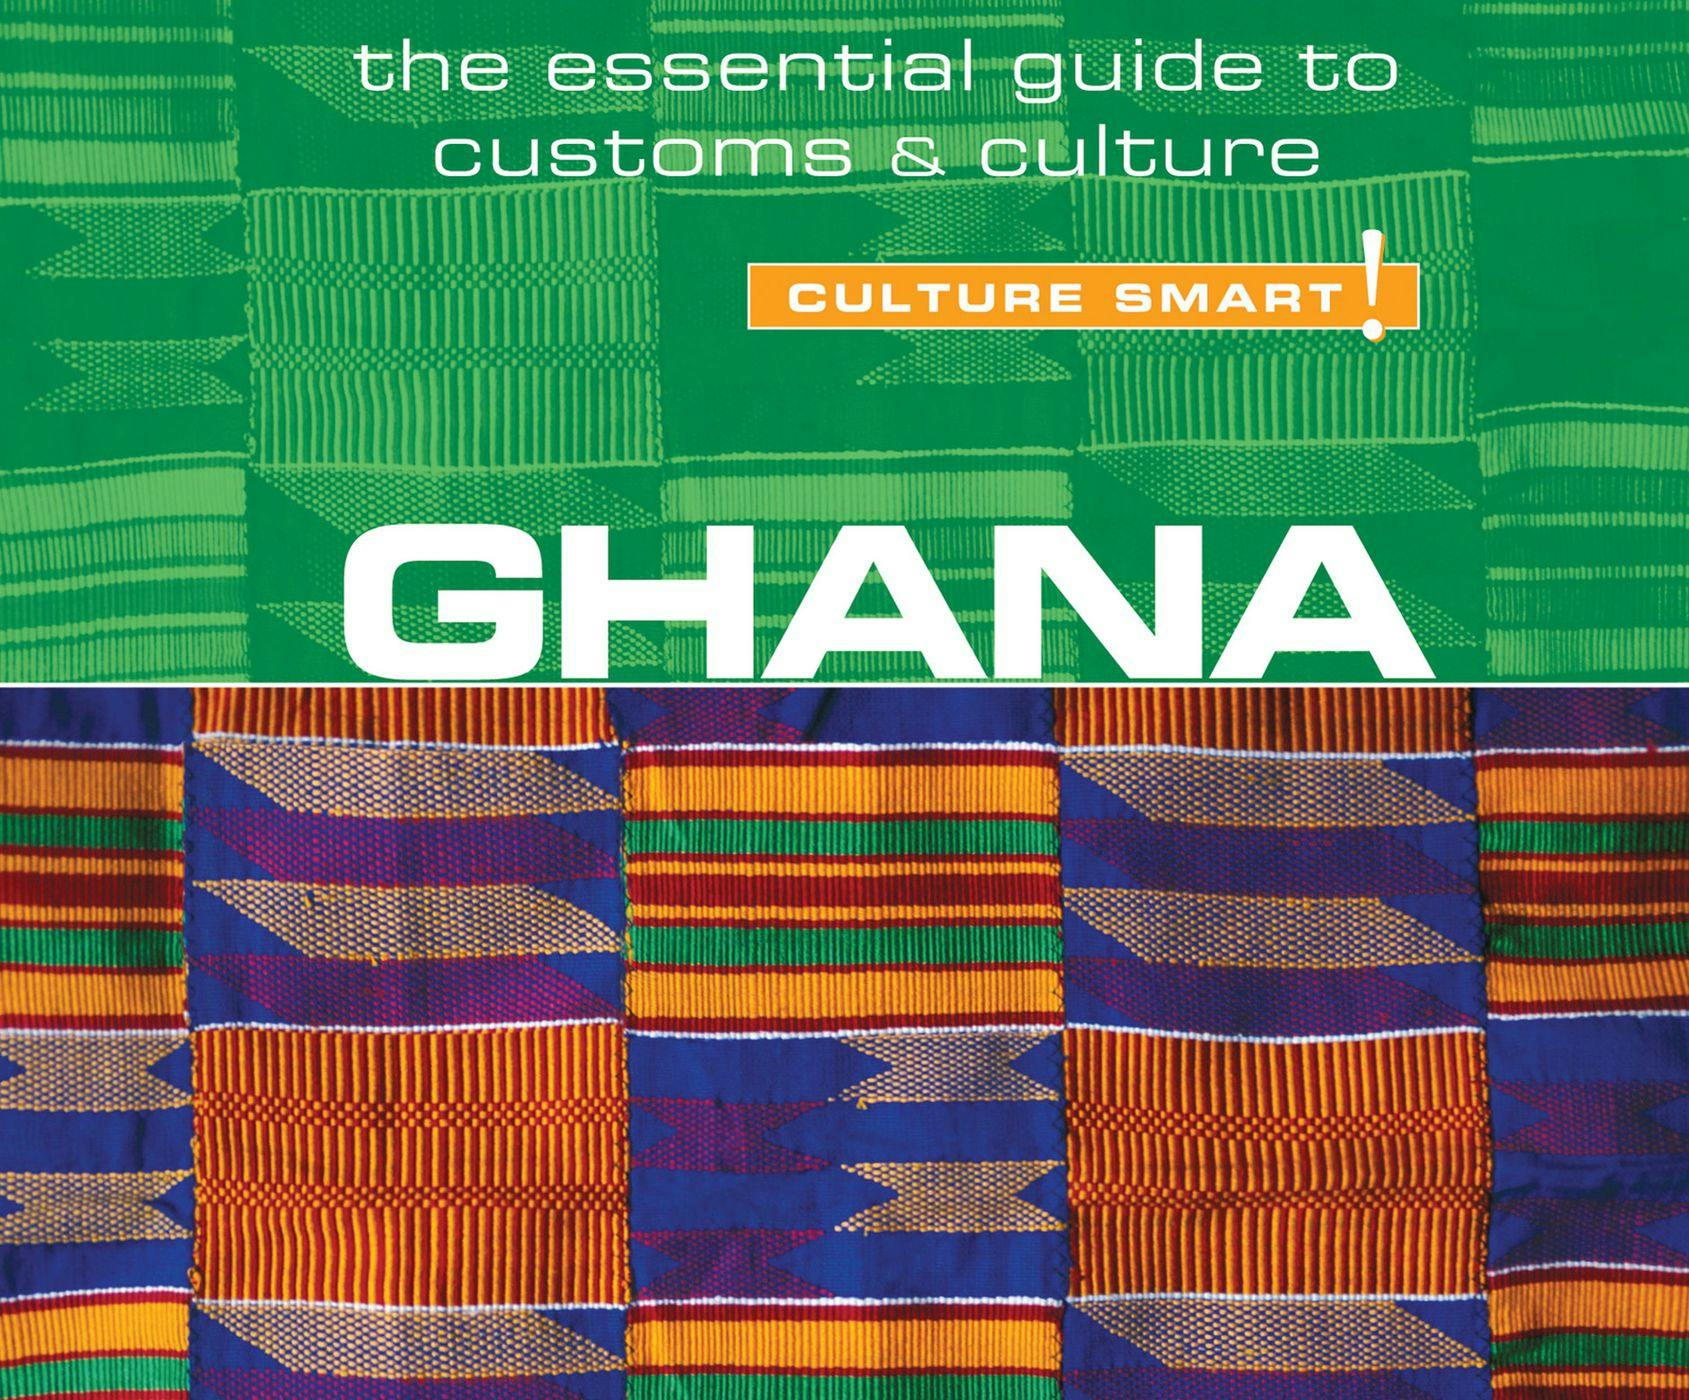 Ghana - Culture Smart! - The Essential Guide to Customs & Culture (Unabridged) - Ian Utley